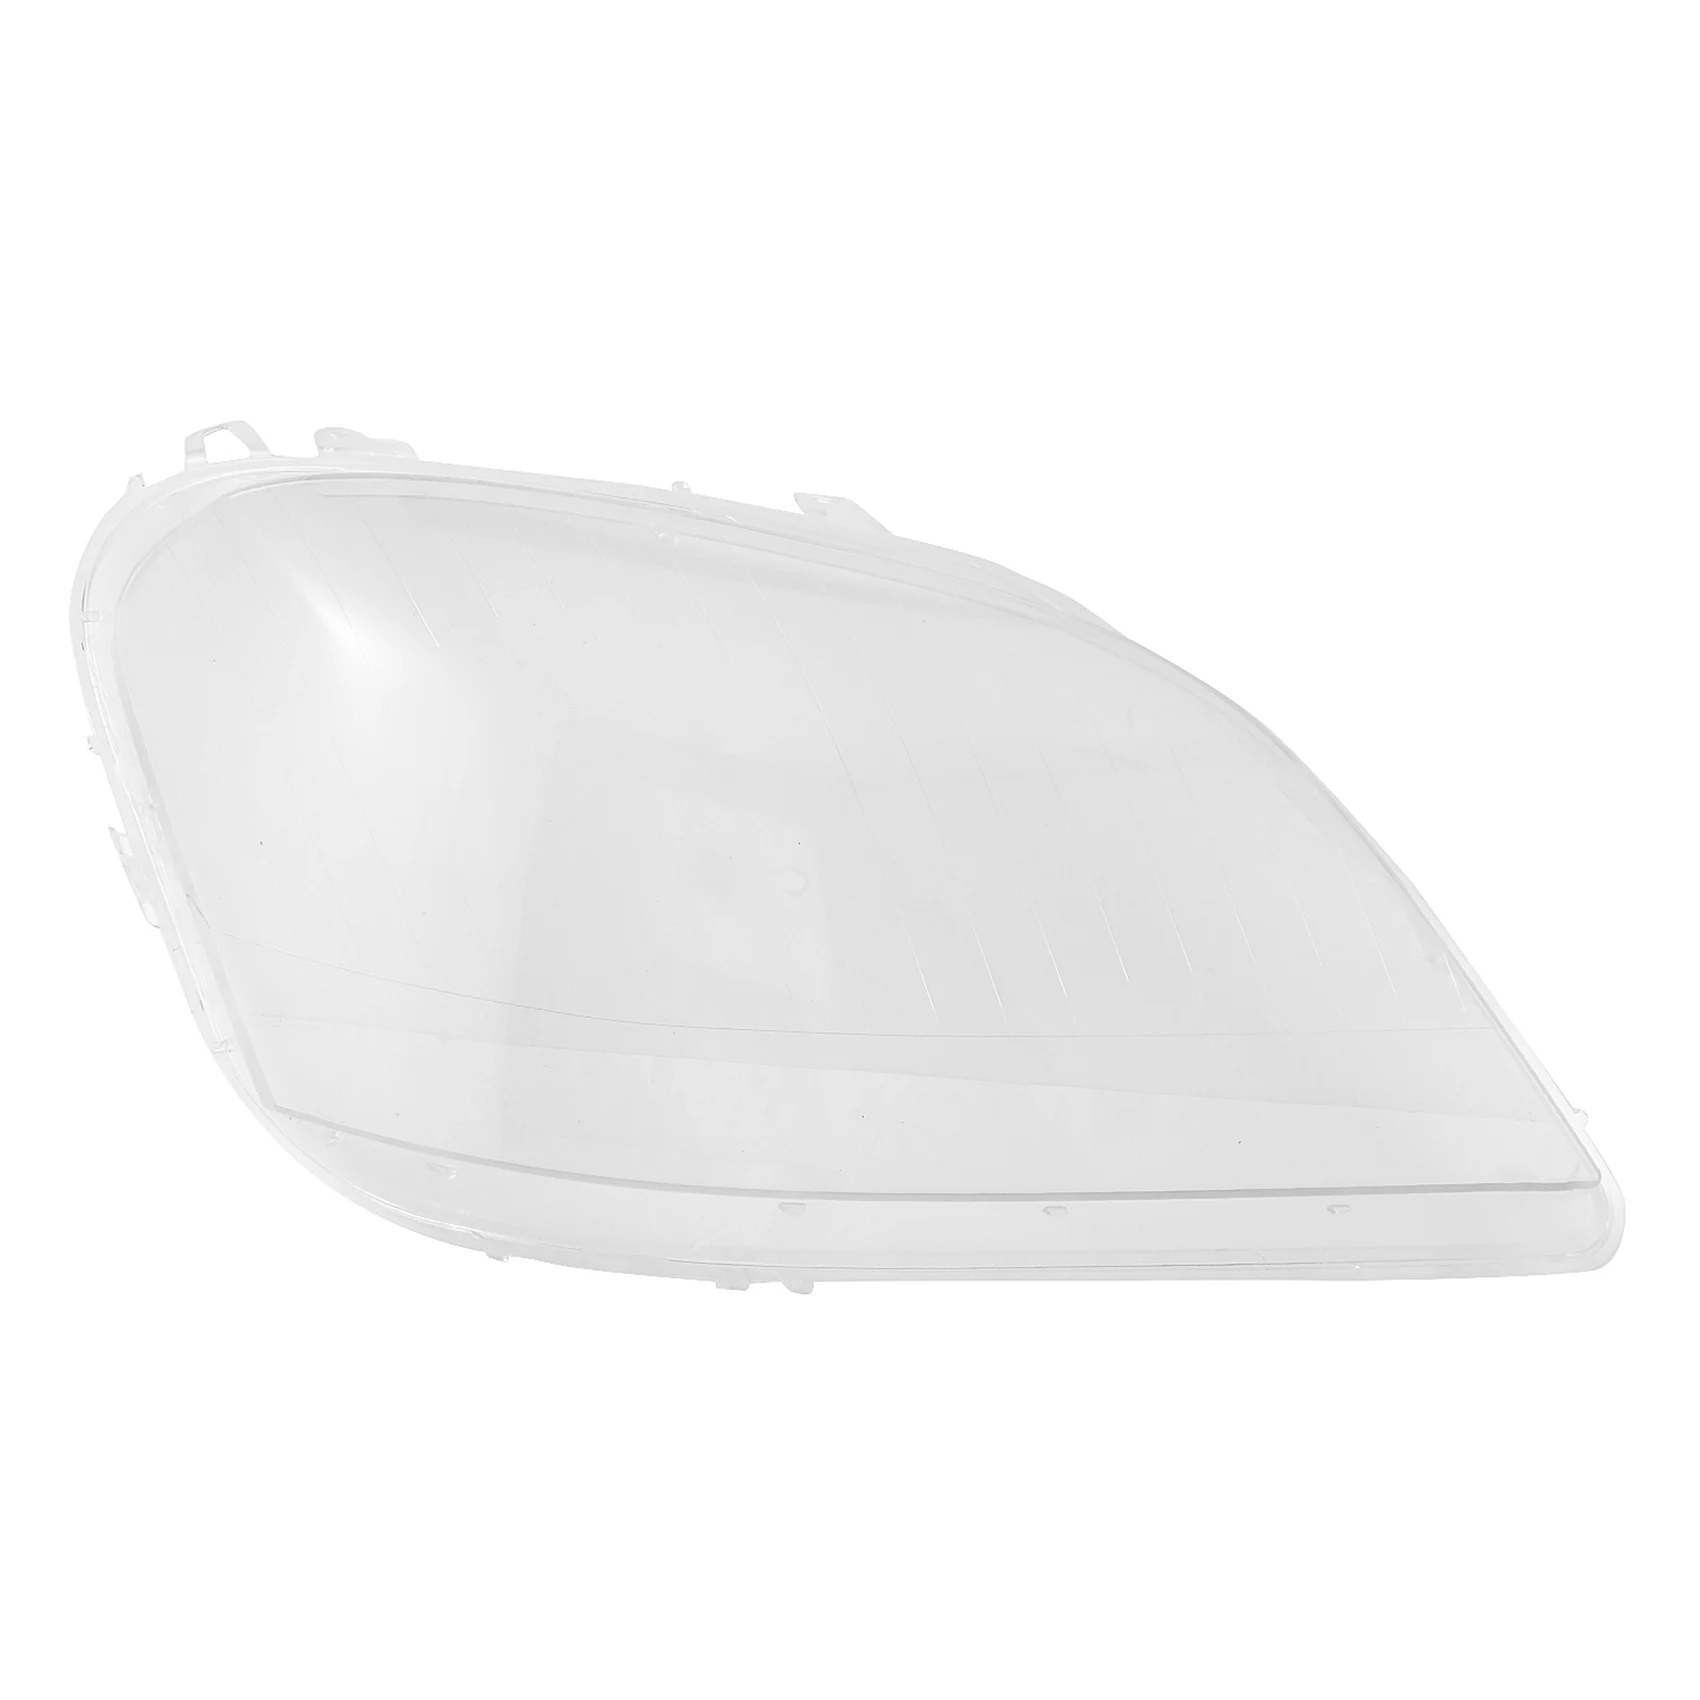 

for Mercedes-Benz W164 ML350 500 2005-2008 Right Side Headlight Lens Cover Head Light Transparent Lampshade Shell Glass